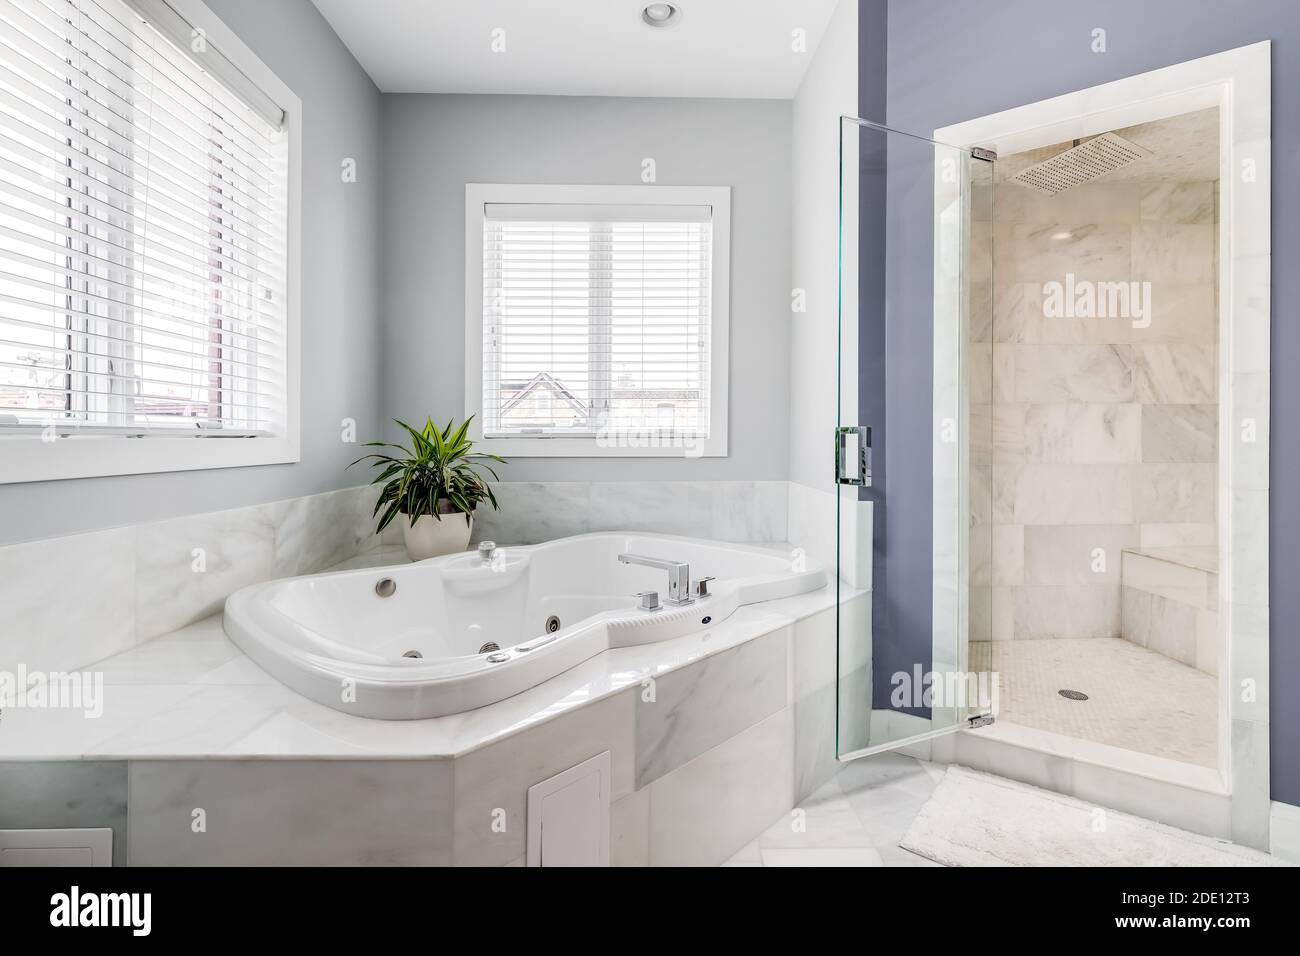 A large jacuzzi tub surrounded by marble tiles and a stand up tiled shower with a bench seat. Stock Photo